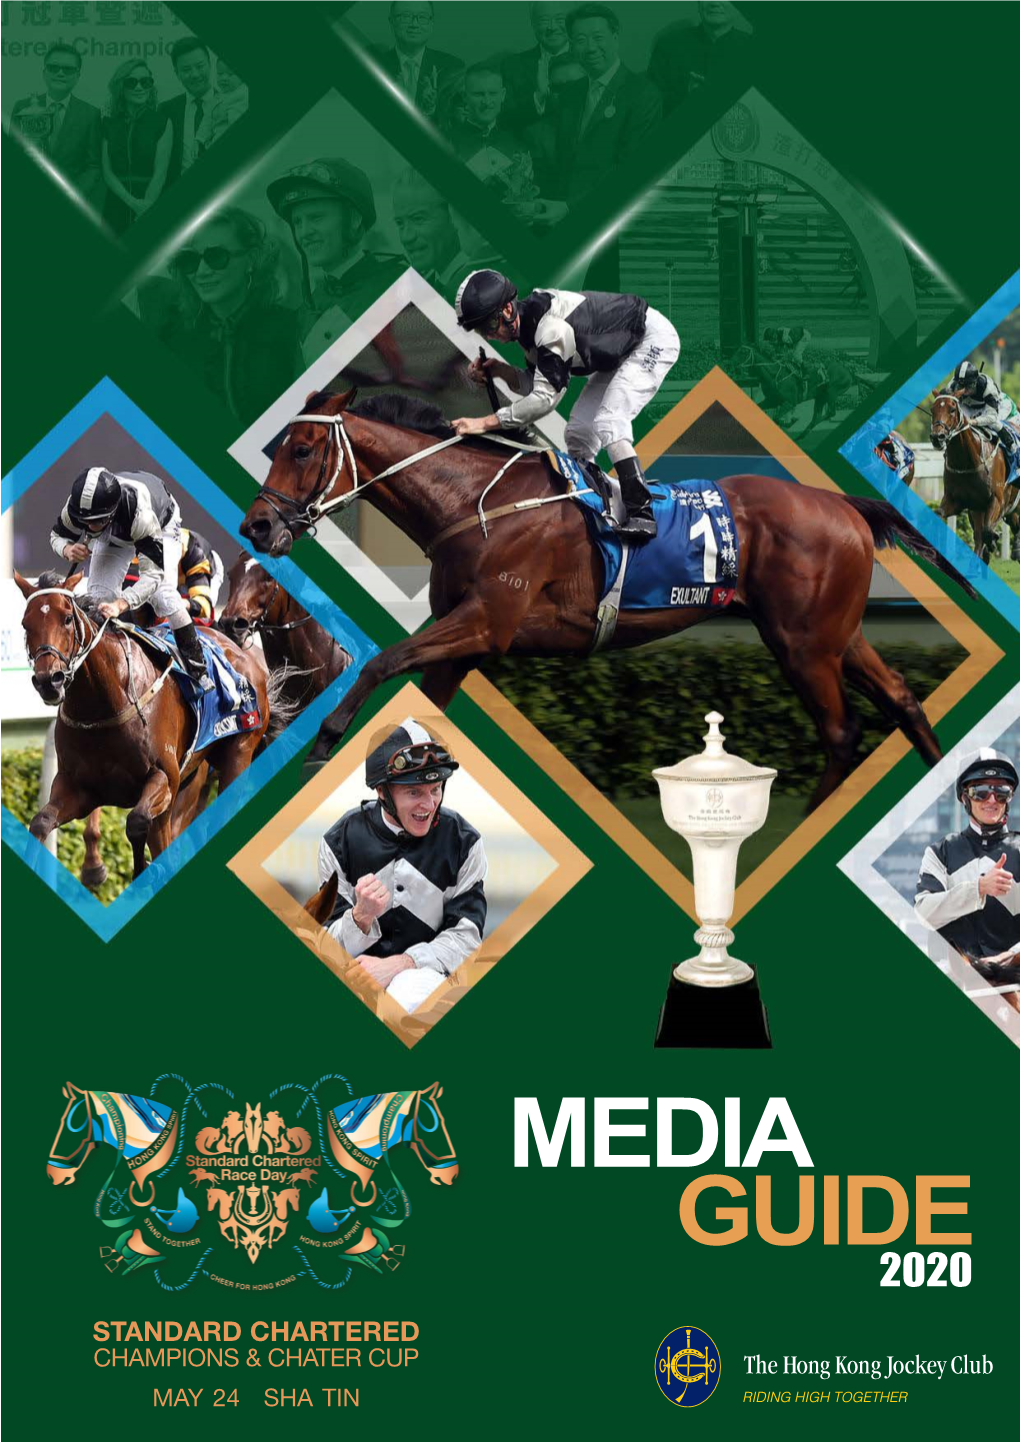 Media Guide STANDARD CHARTERED CHAMPIONS & CHATER CUP